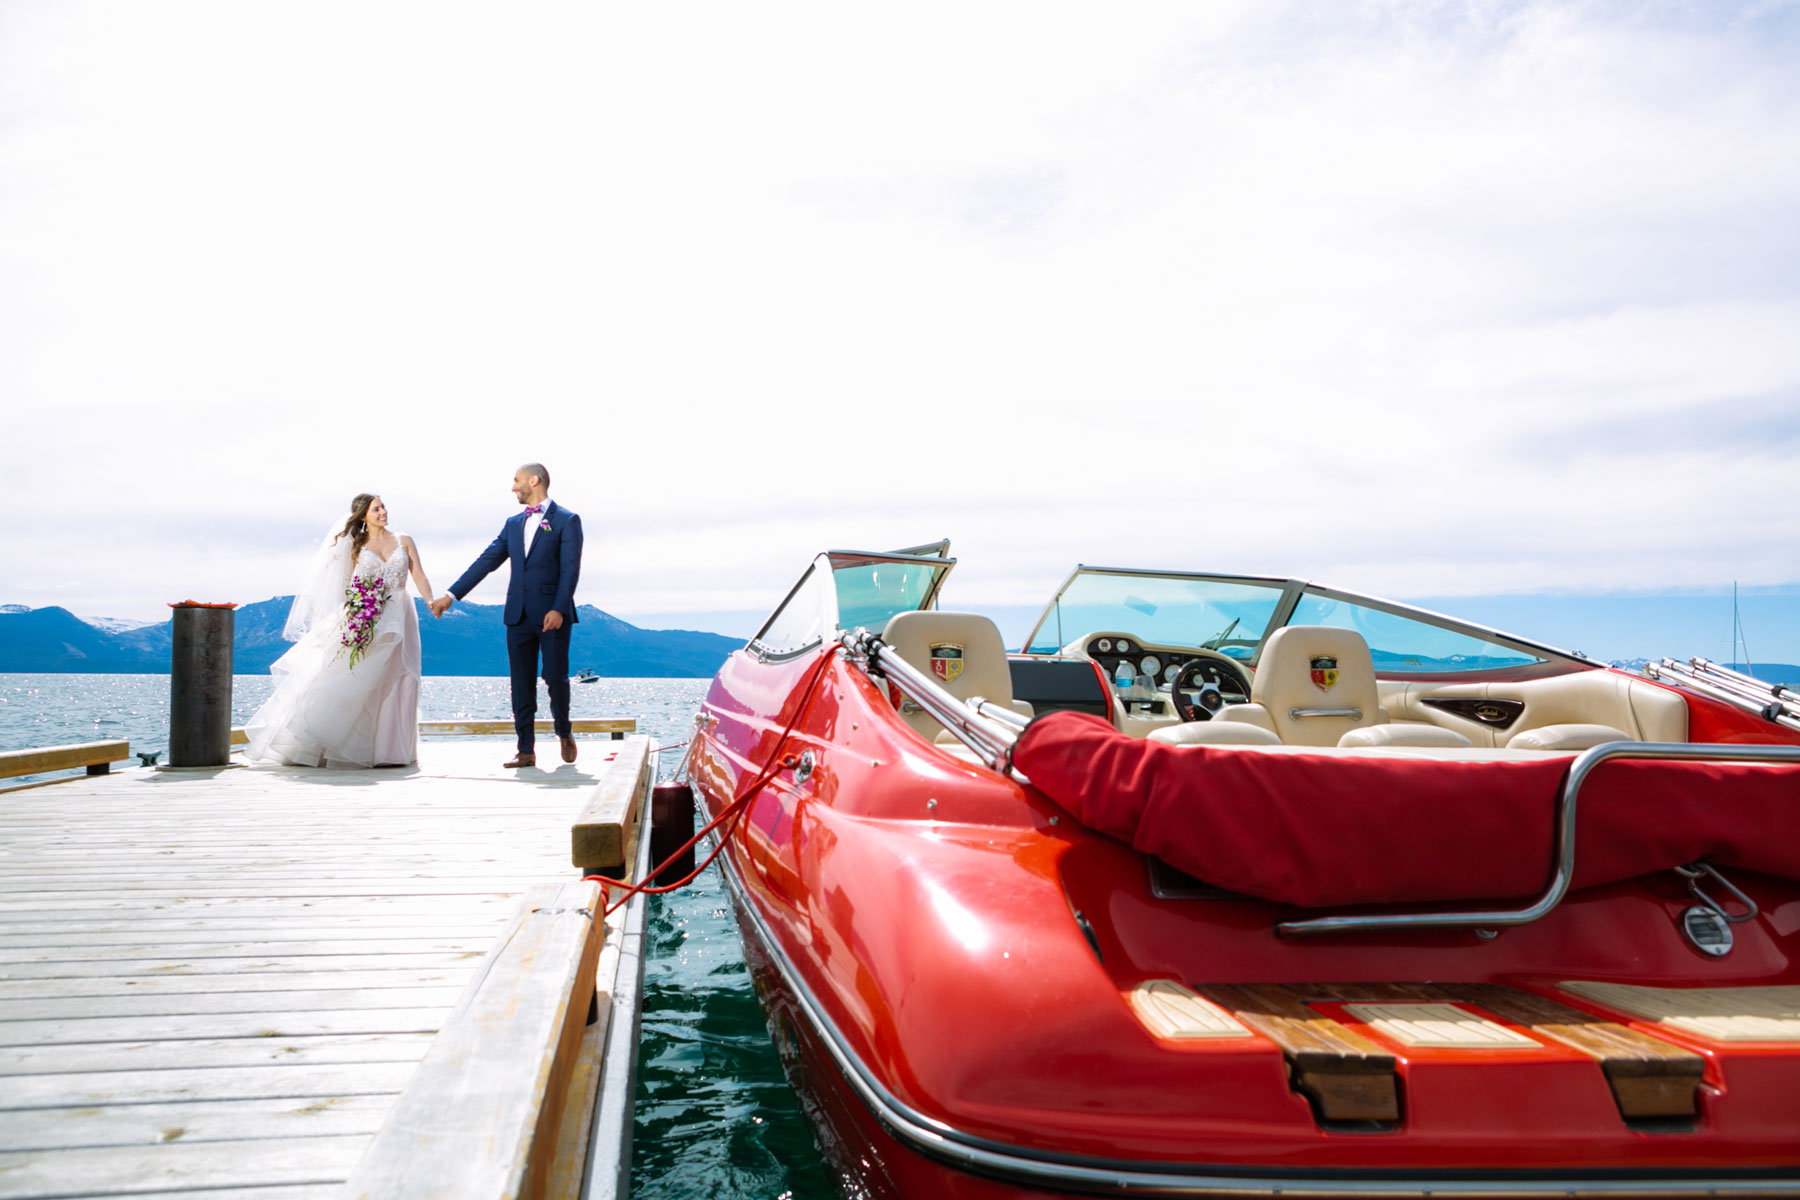 Lovely wedding at Round Hill pines Lake tahoe. Bride and groom and a awesome reb Boat